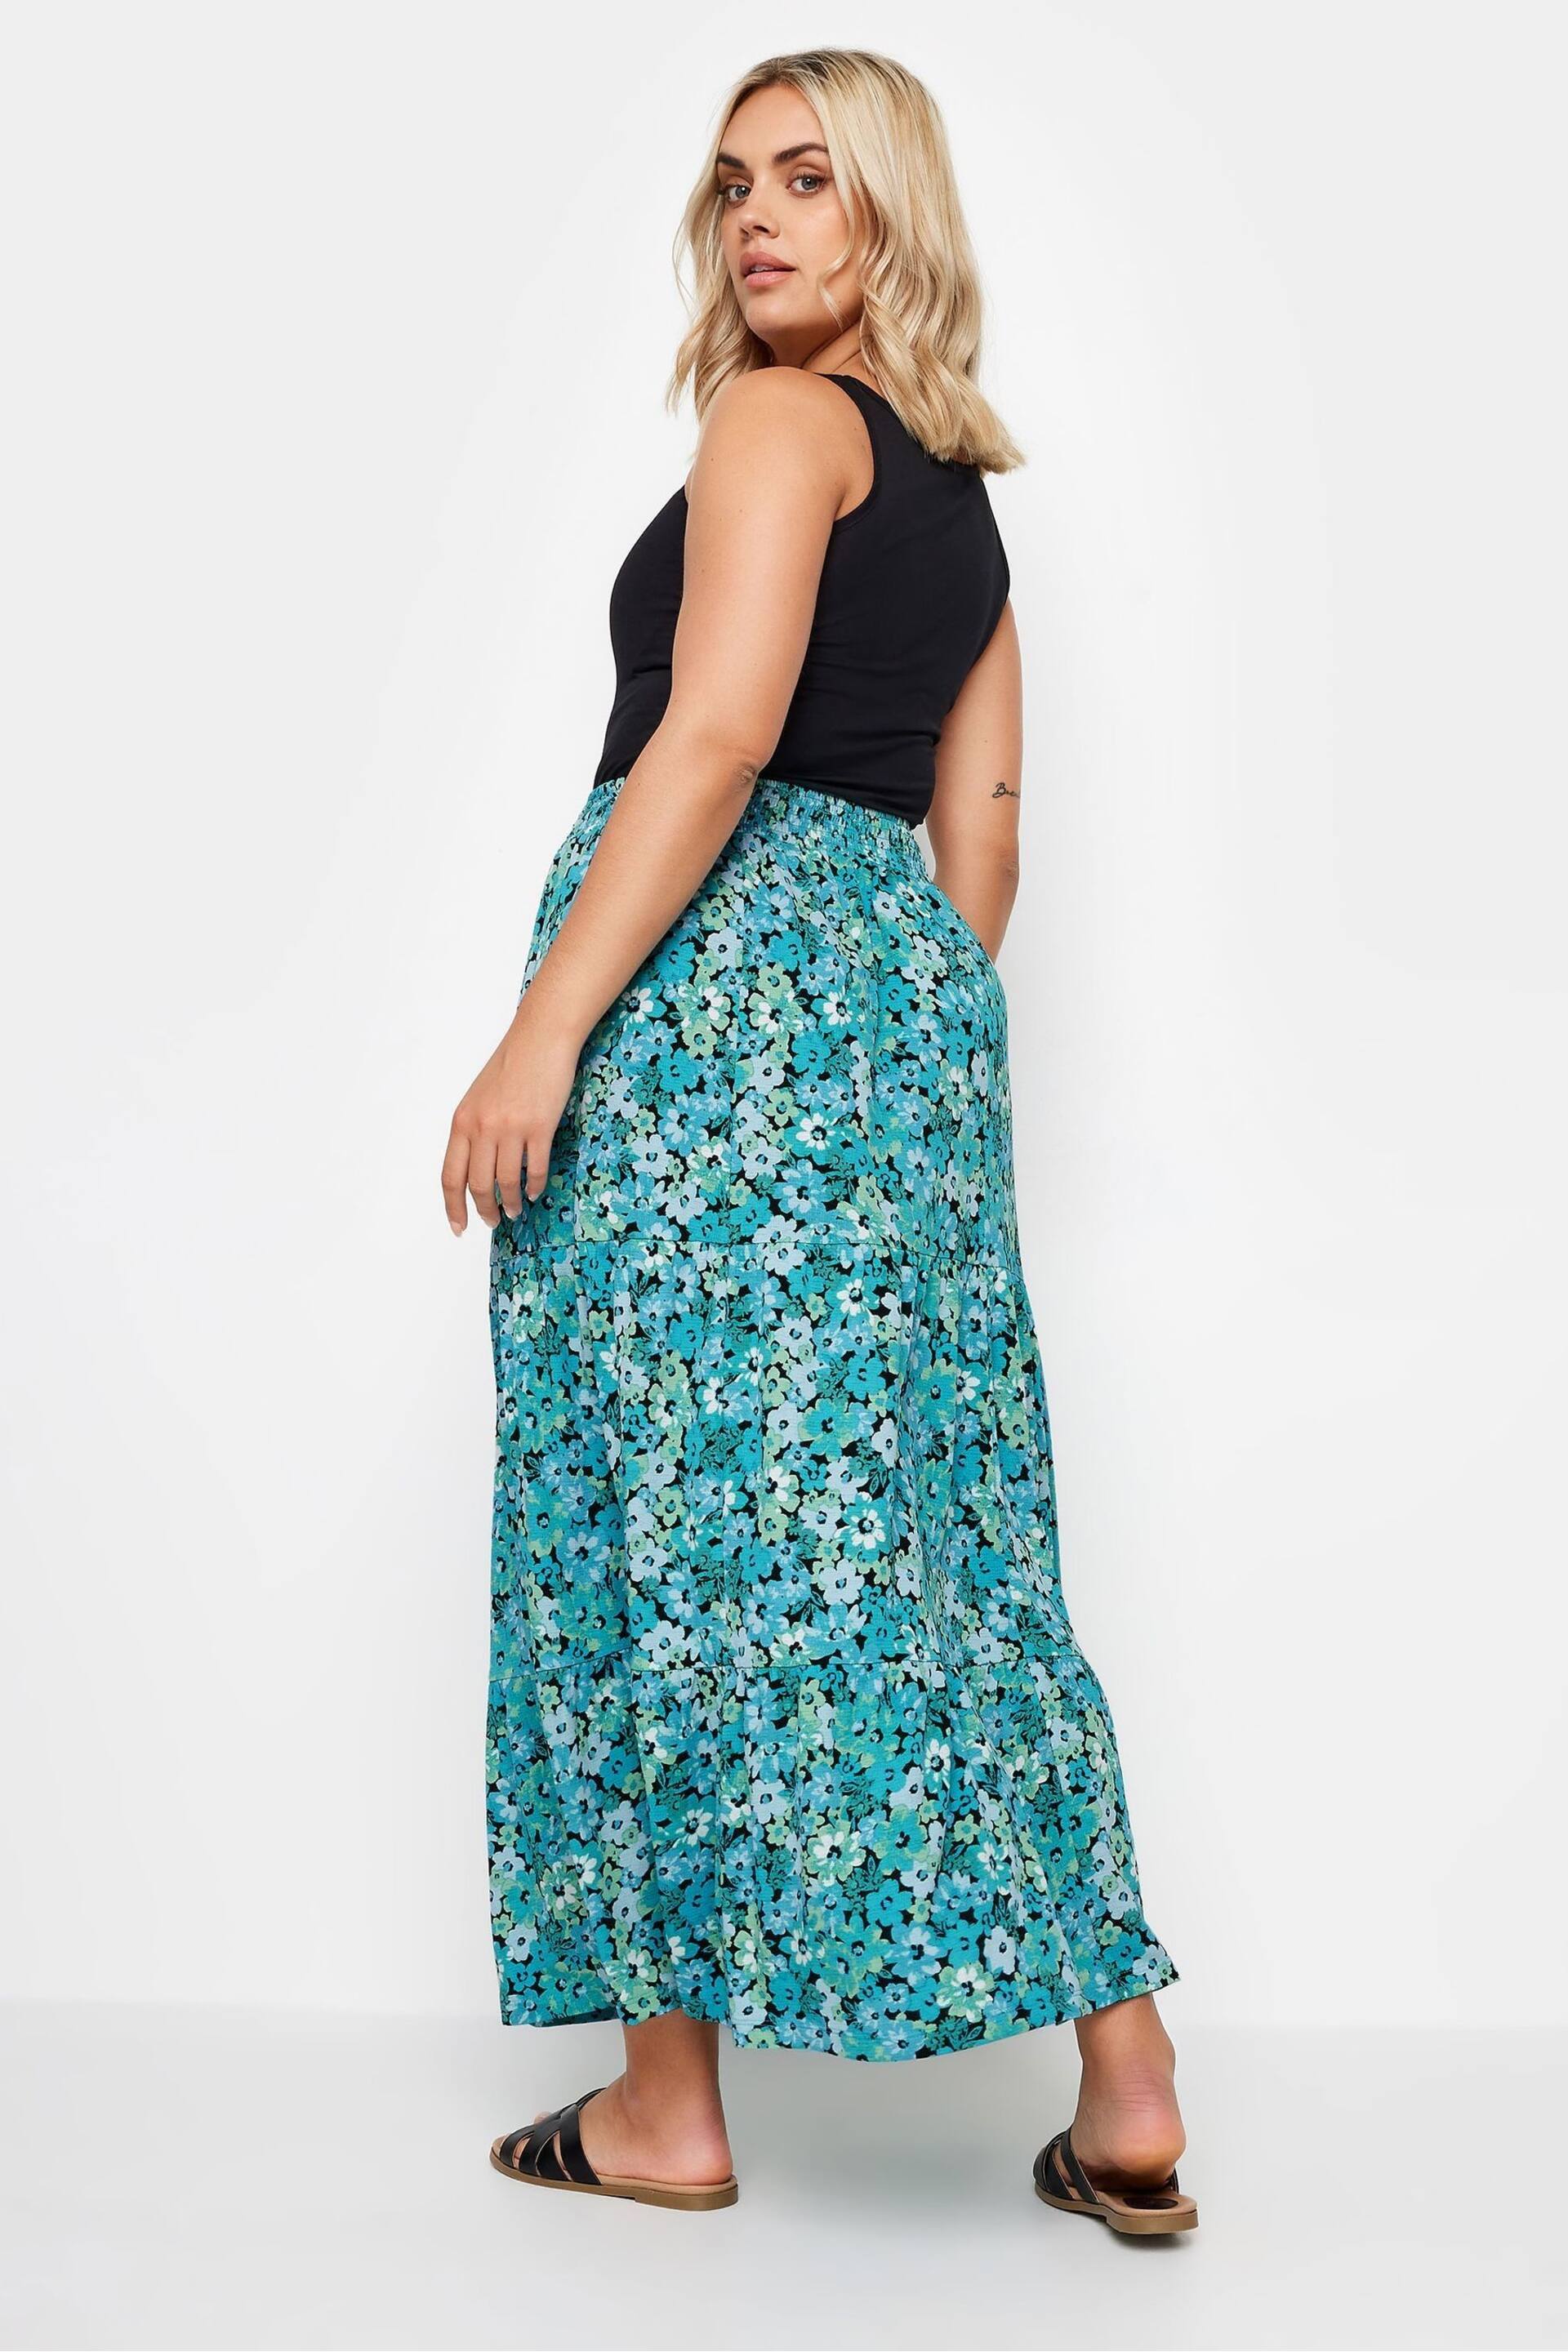 Yours Curve Blue Floral Print Textured Tiered Maxi Skirt - Image 3 of 4